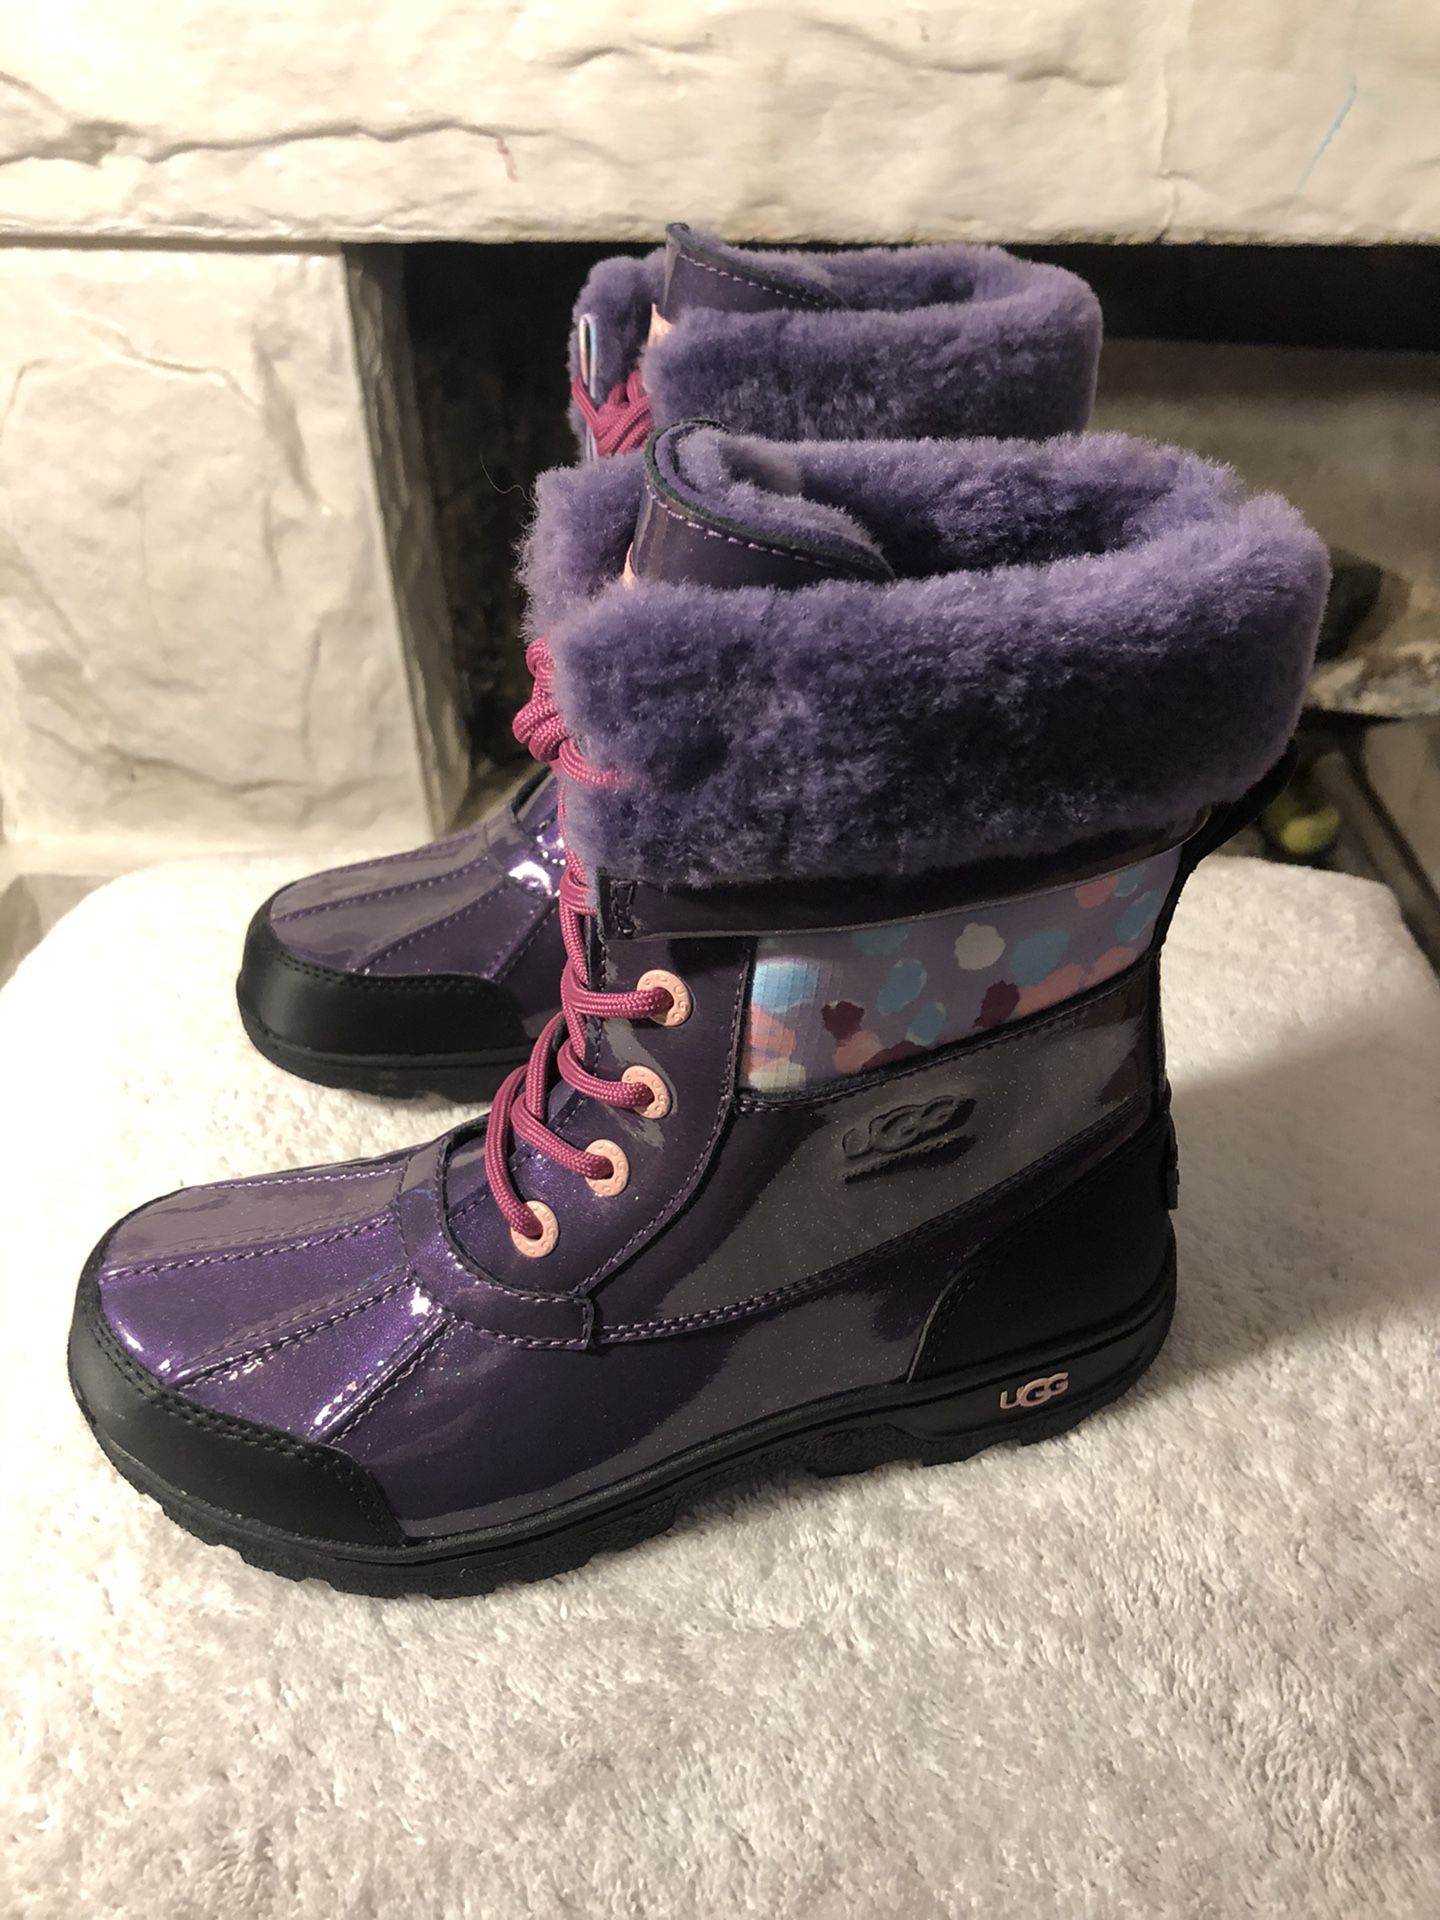 KIDS UGG BOOTS RAINING/SNOW BOOTS SIZE 4